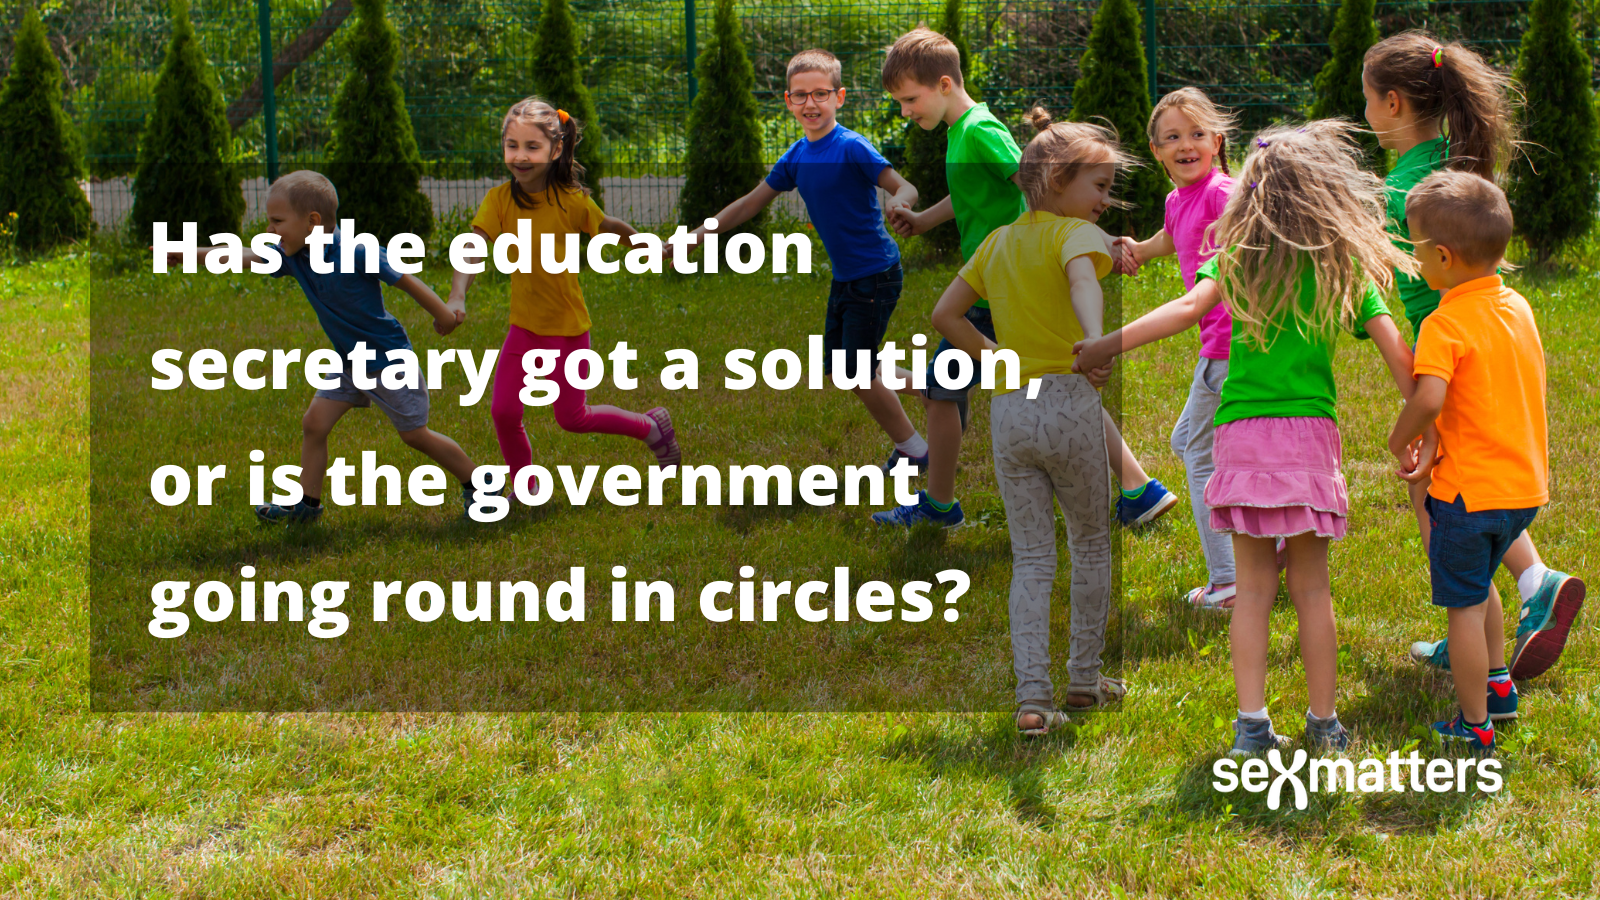 Has the education secretary got a solution, or is the government going round in circles?